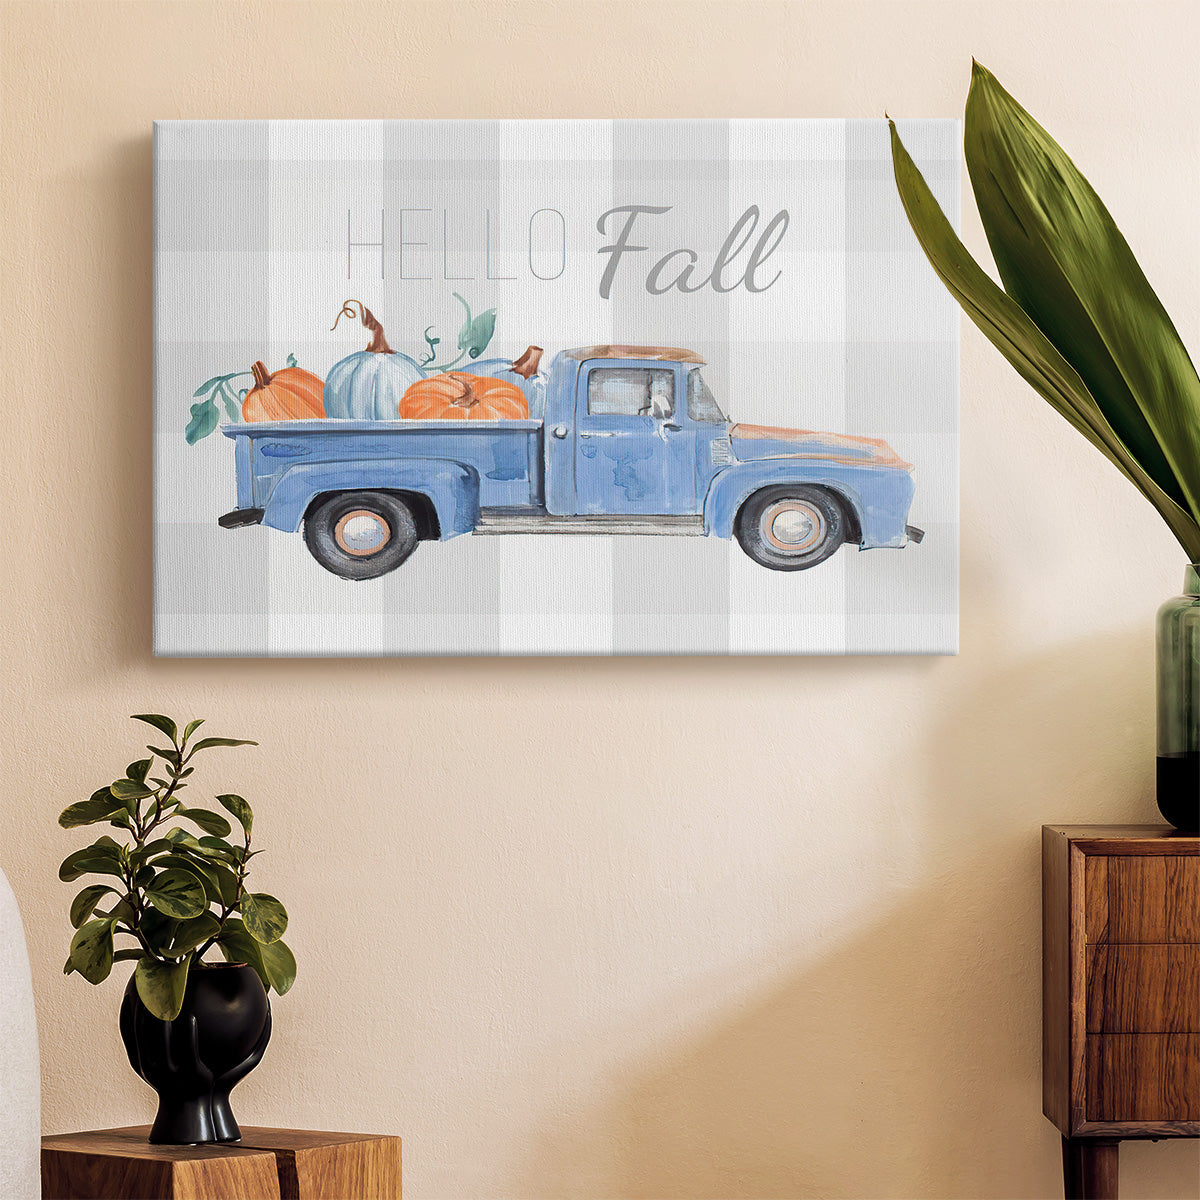 Happy Harvest II Premium Gallery Wrapped Canvas - Ready to Hang